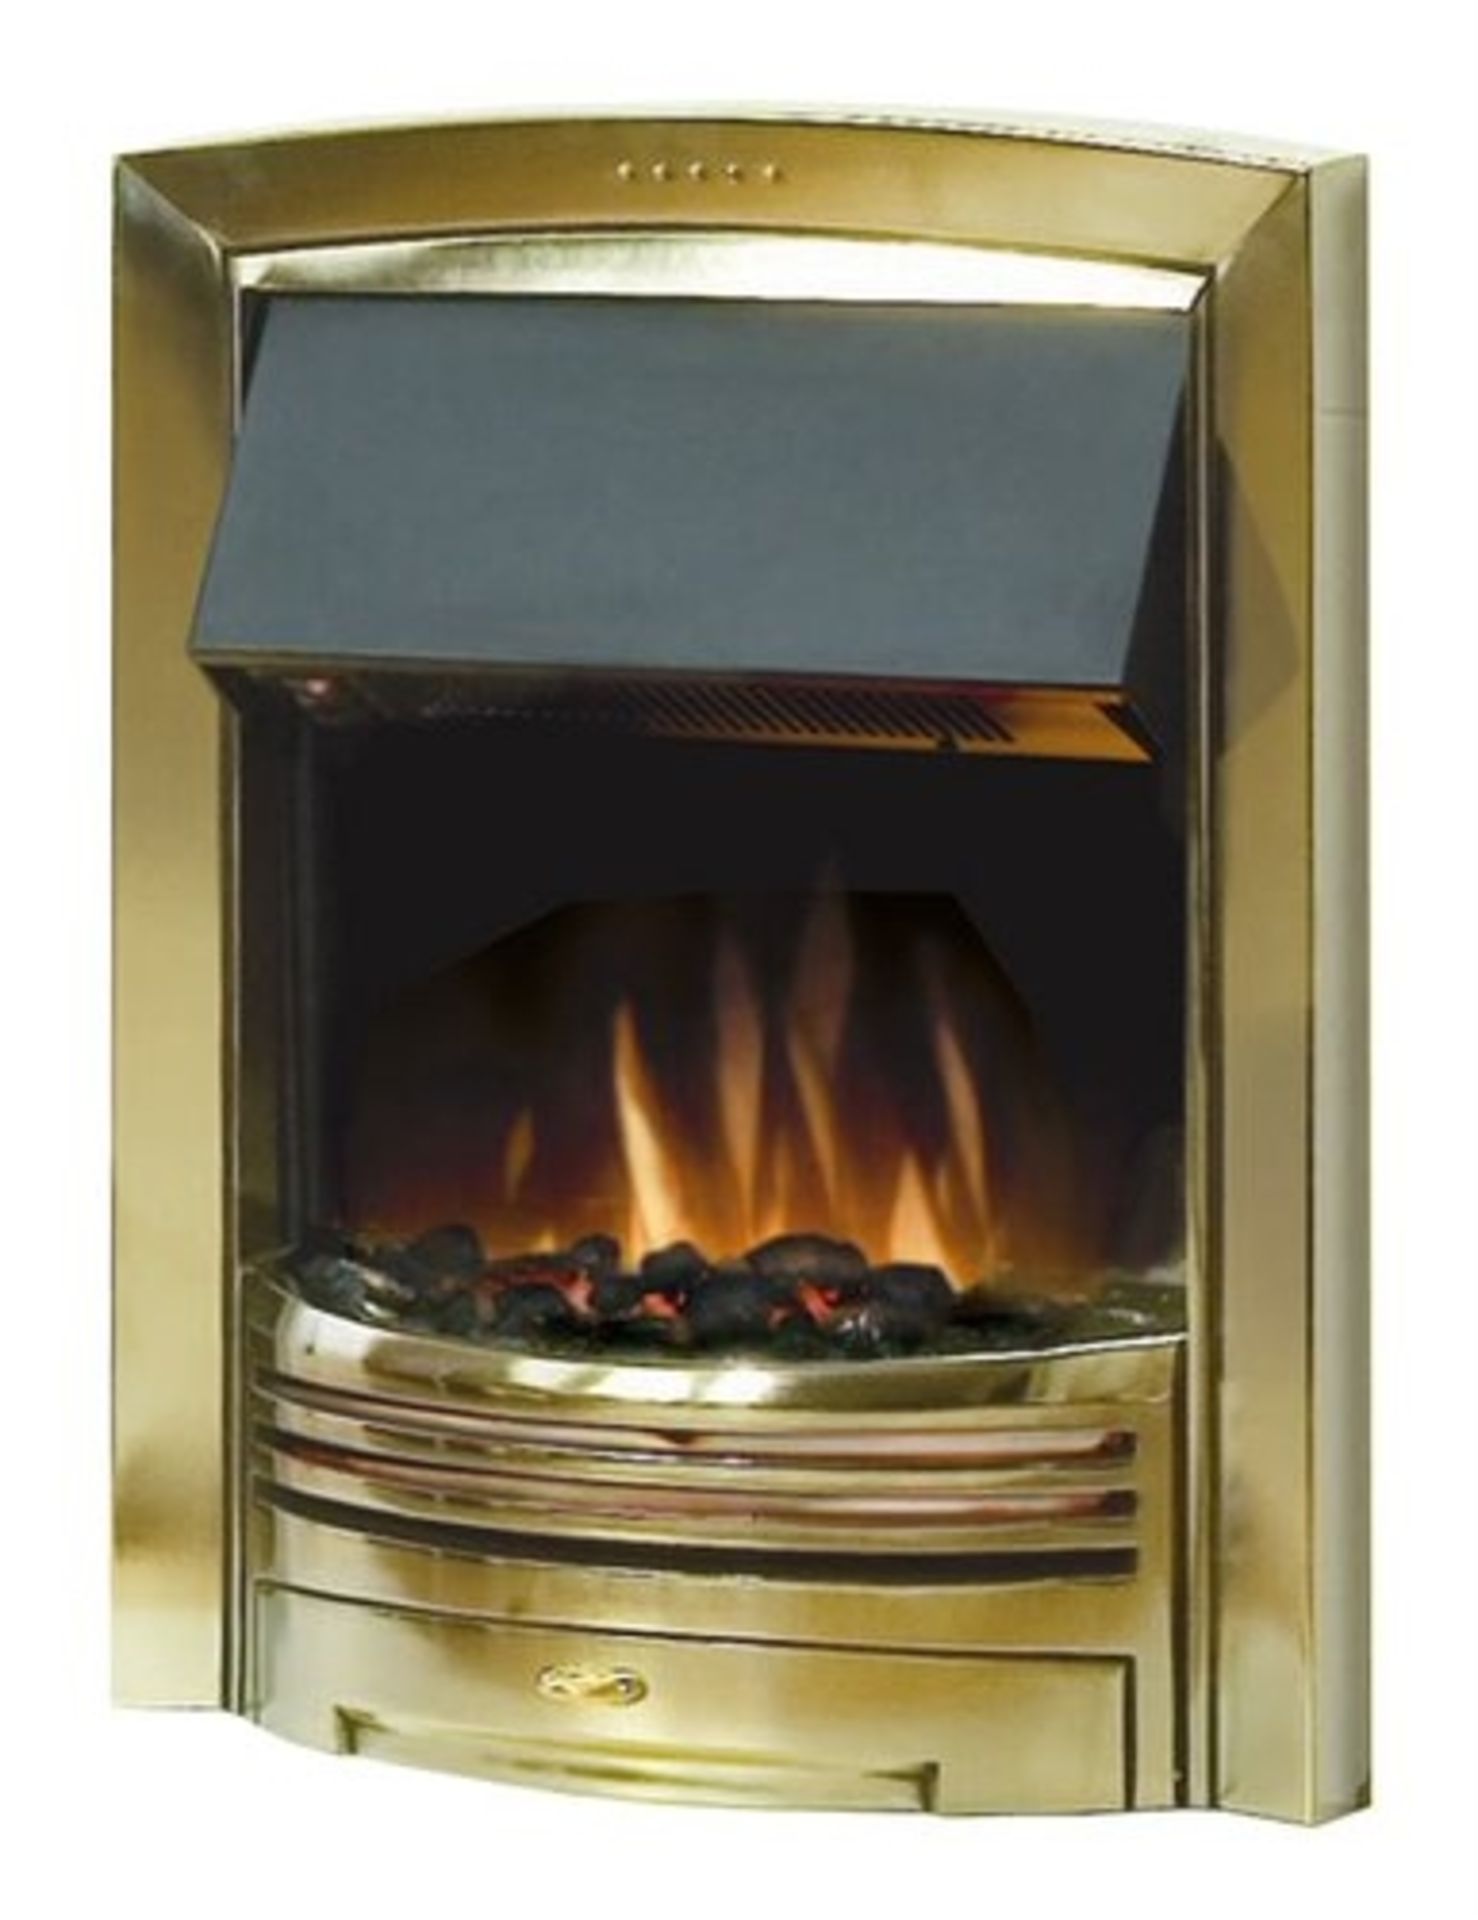 2 x BRAND NEW BOXED Dimplex Adagio Brass Optiflame Electric Fire. RRP £495 each, giving this lot a - Image 2 of 2